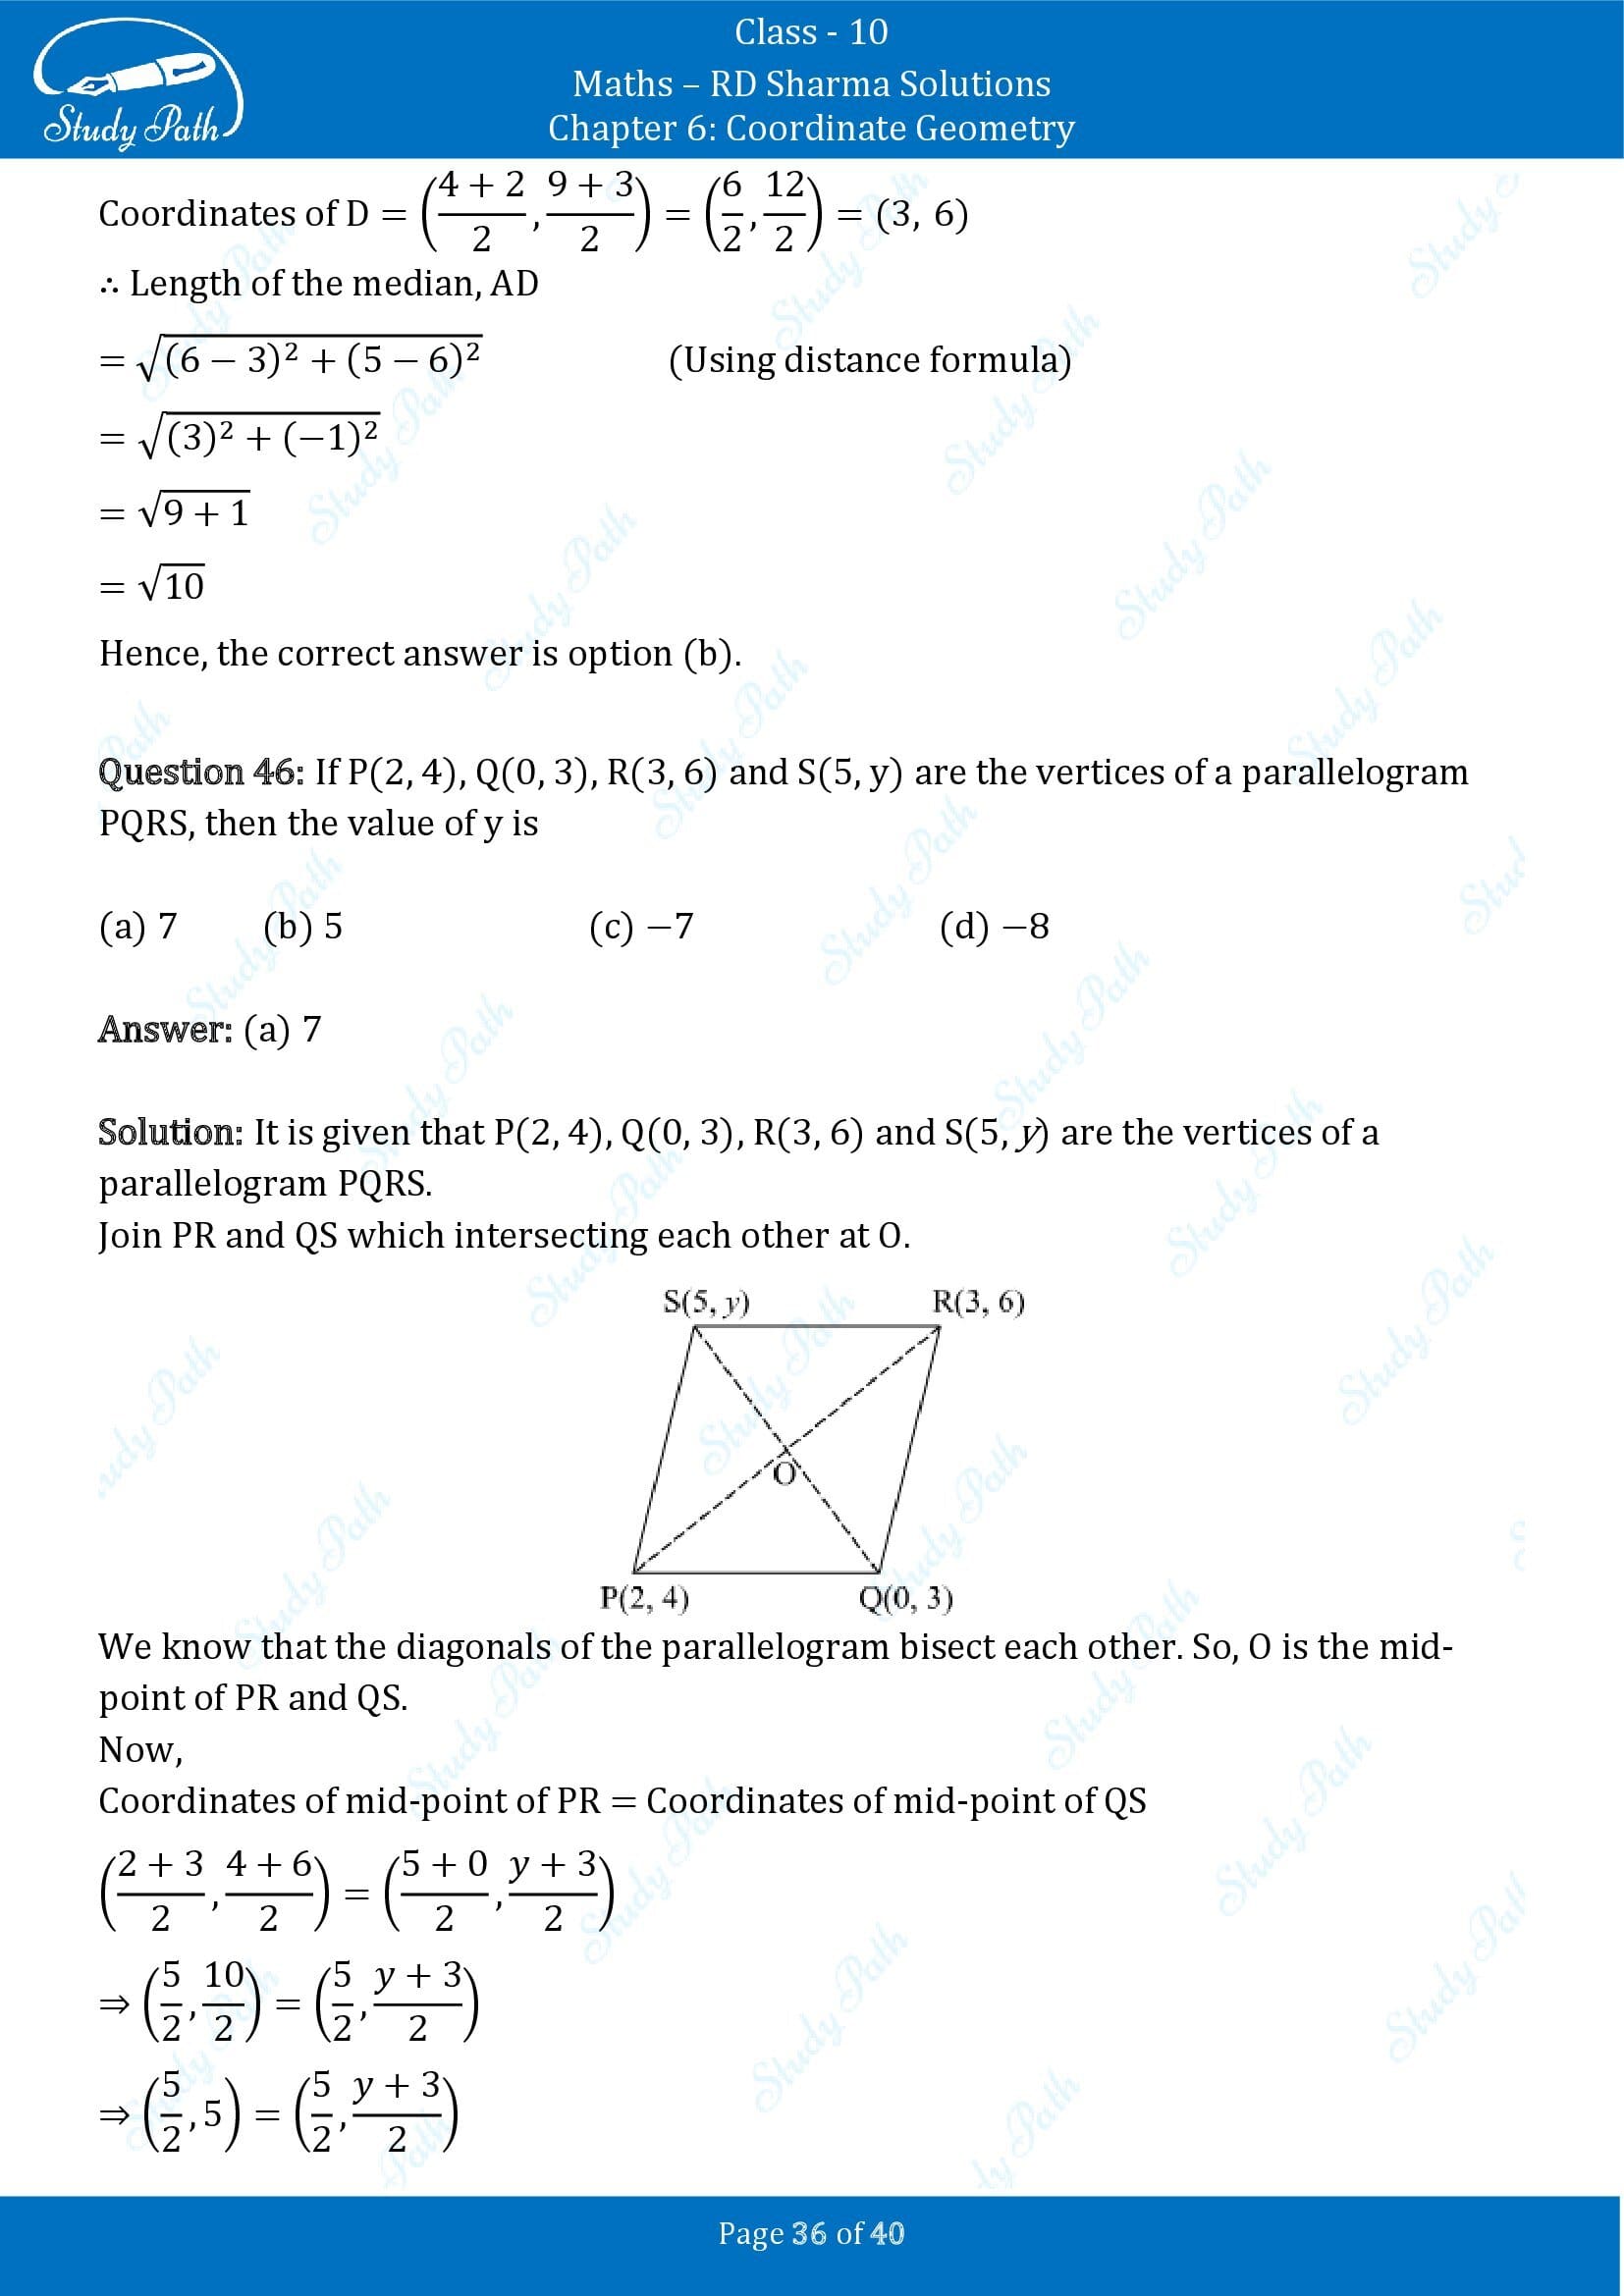 RD Sharma Solutions Class 10 Chapter 6 Coordinate Geometry Multiple Choice Question MCQs 00036